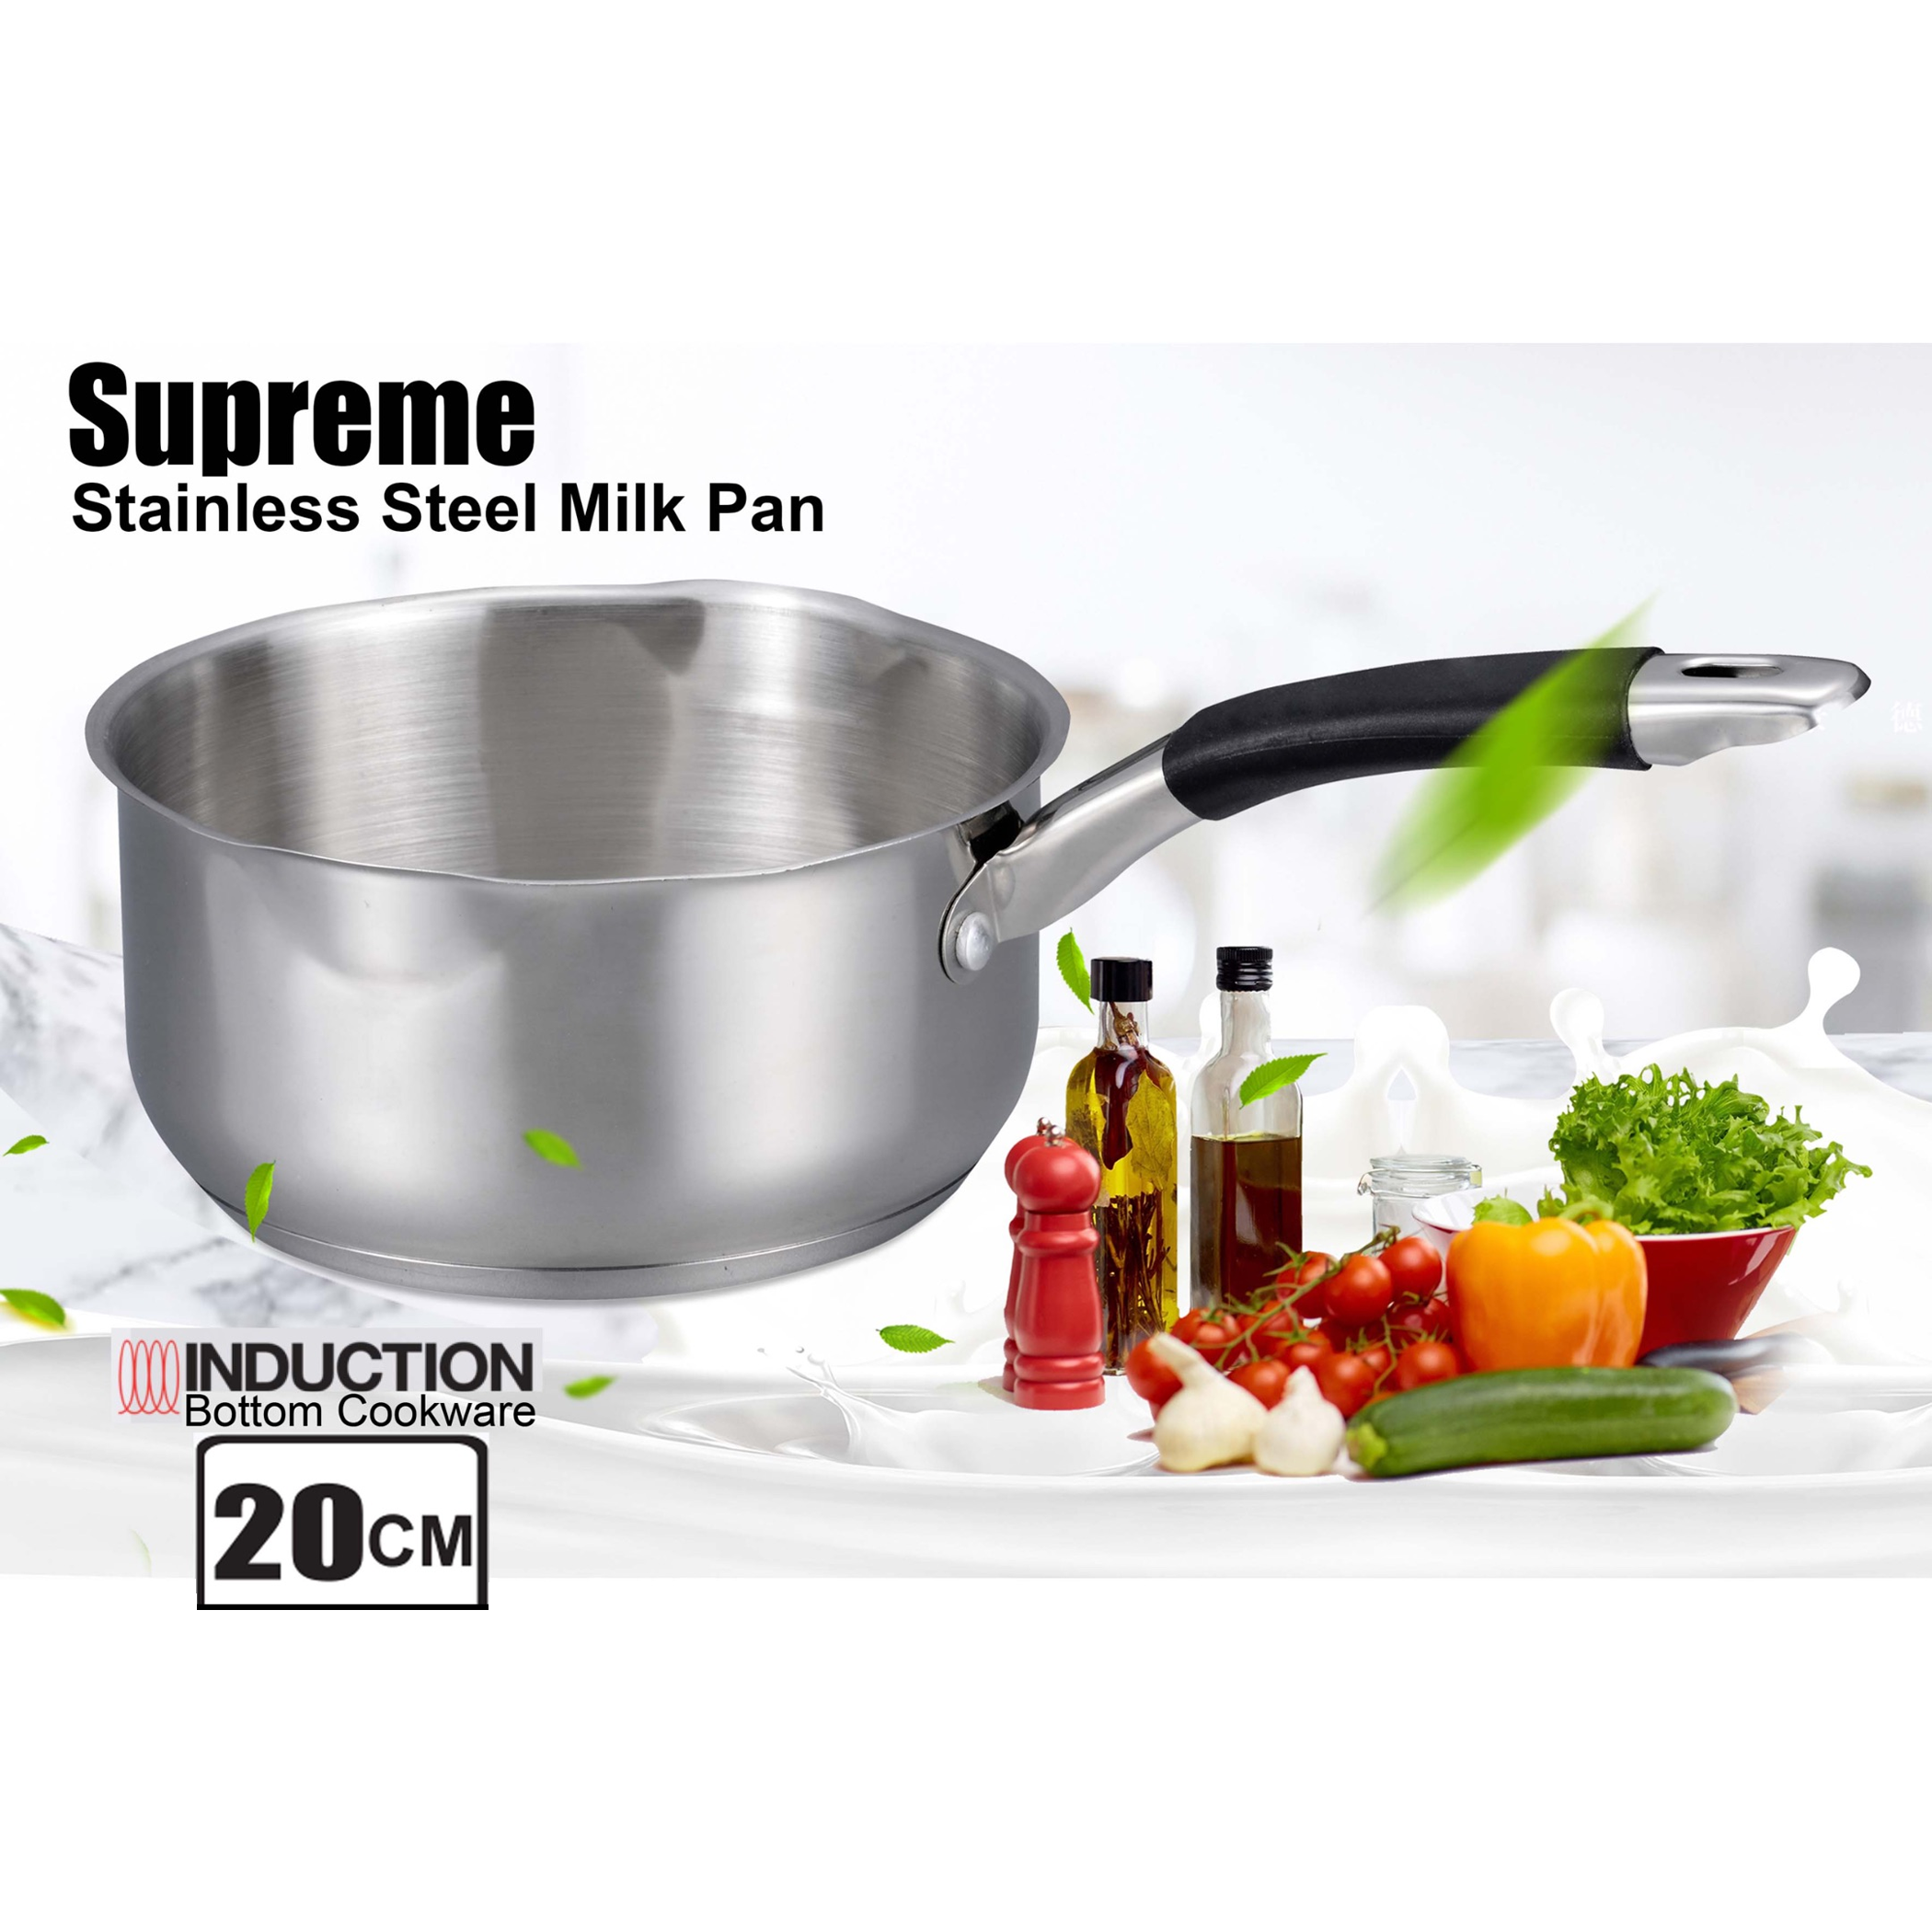 Supreme Stainless Steel - Induction Base Milk Pan - 20 cm